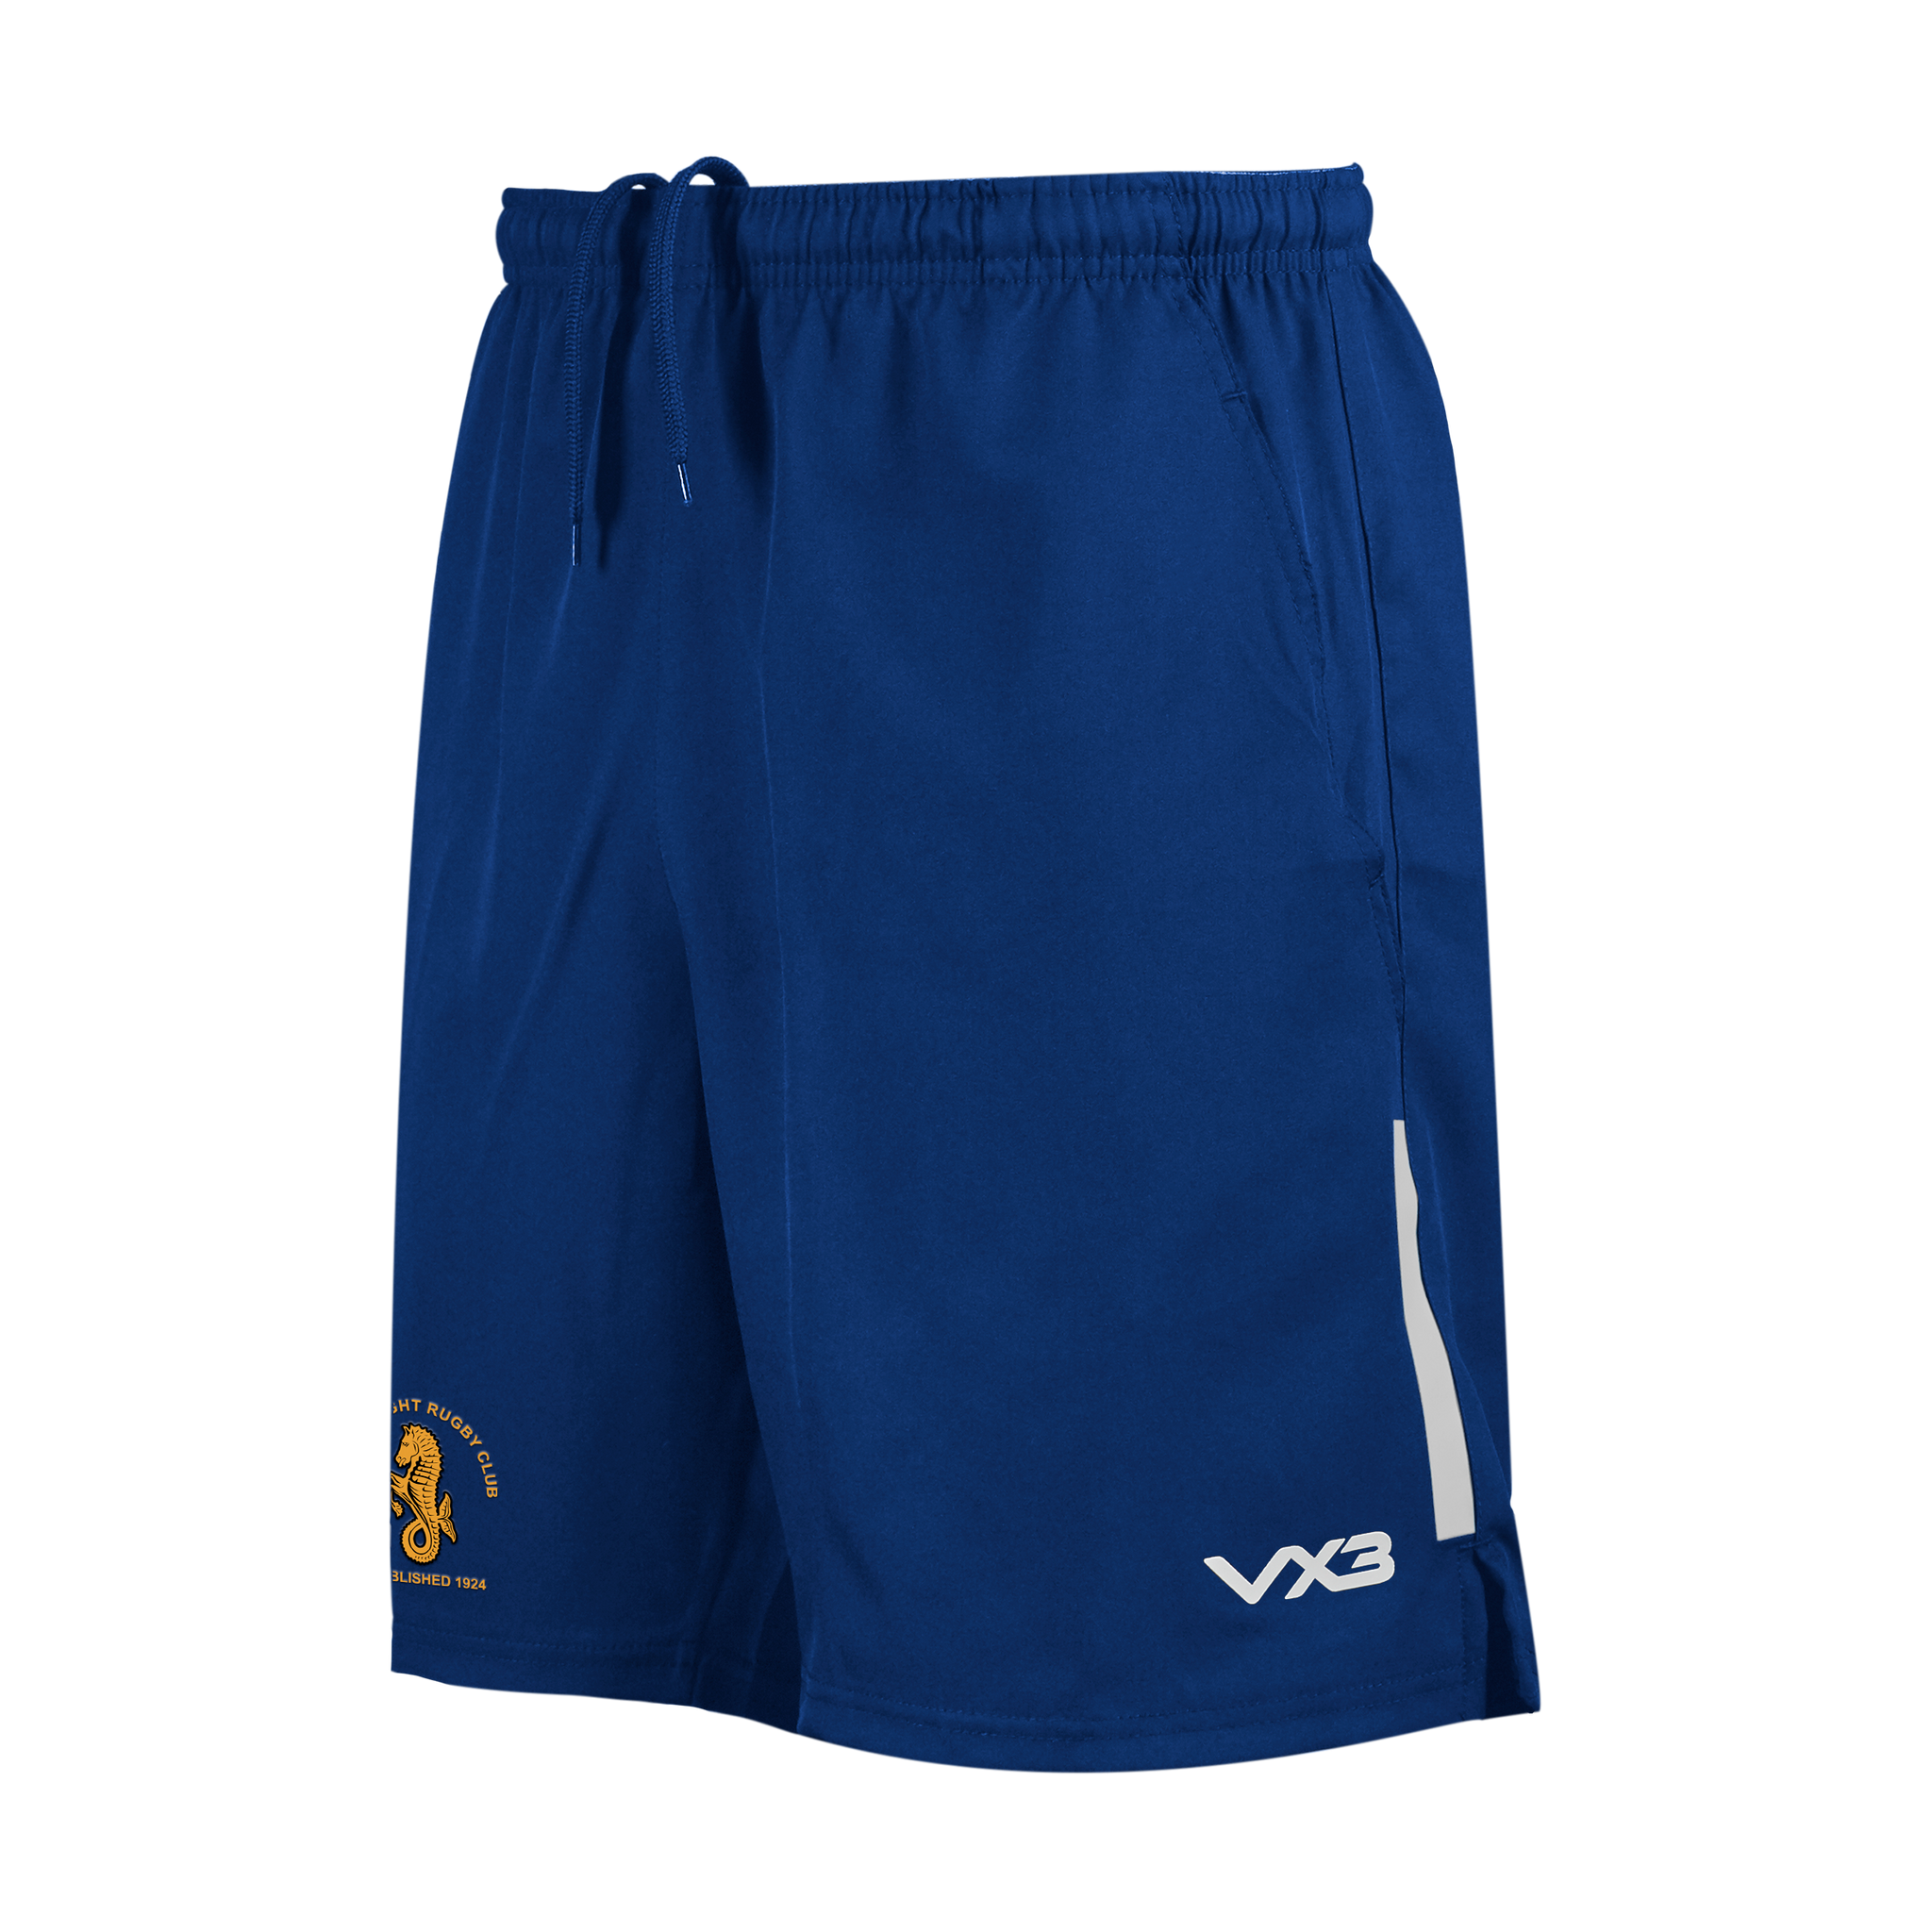 Isle of Wight RFC Fortis Travel Shorts